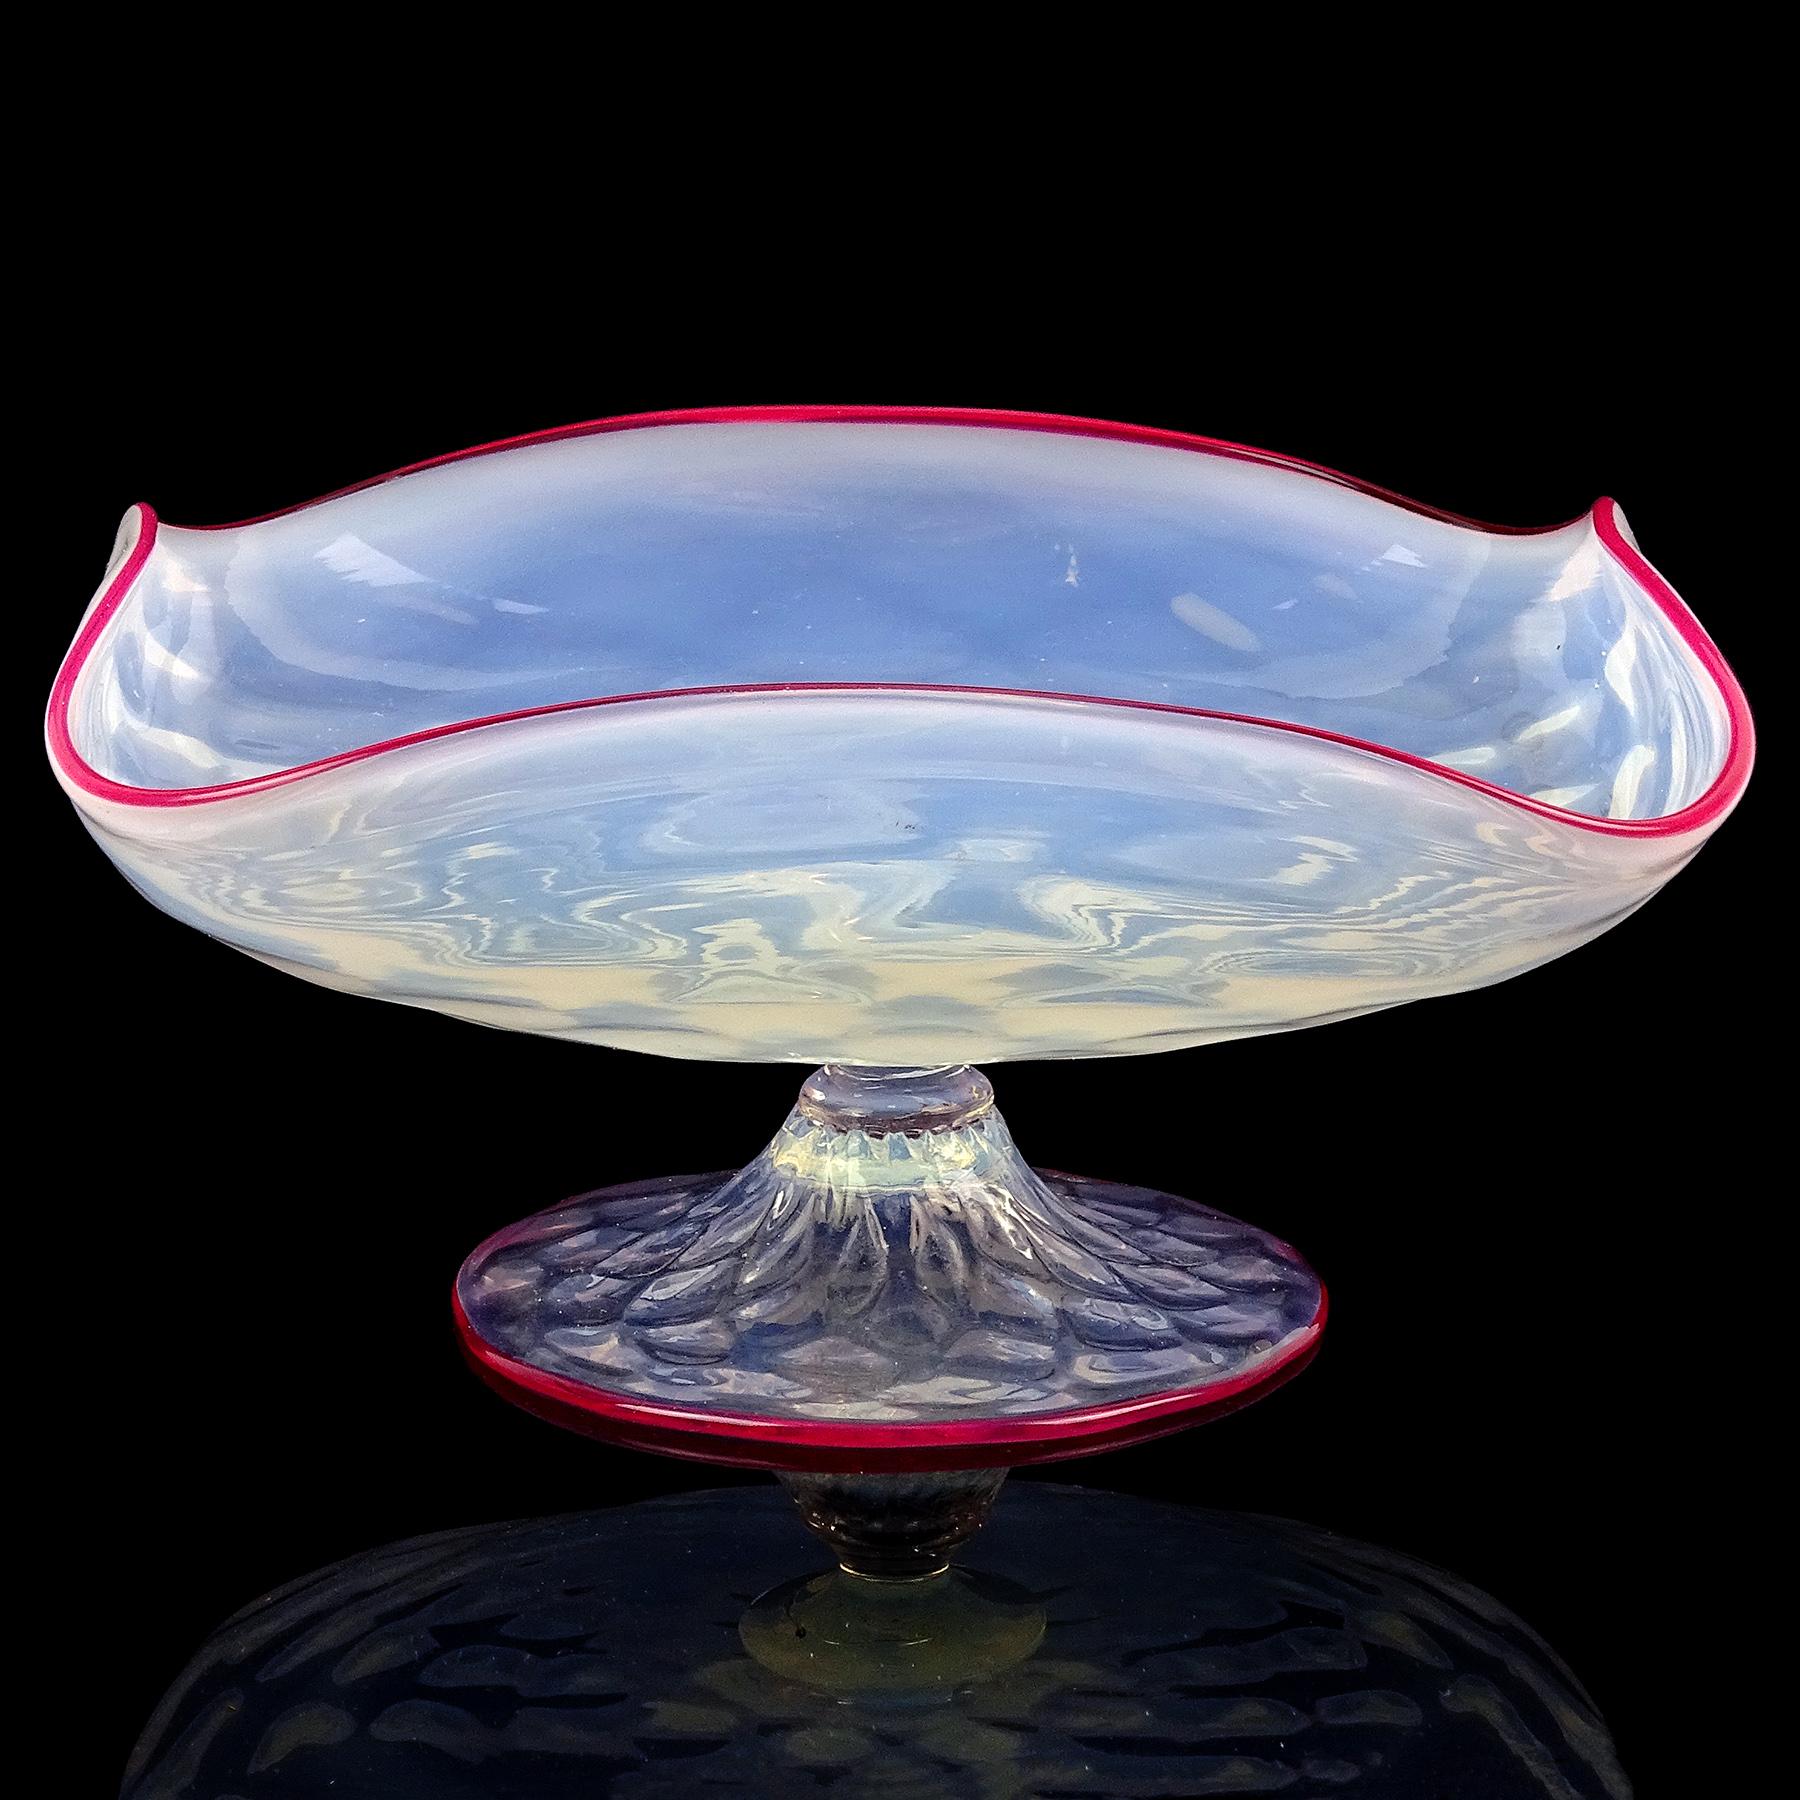 Beautiful antique Venetian, early Murano hand blown white opalescent with dark pink edge Italian art glass quilted footed bowl. Attributed to the Salviati company. The bowl has a squared shape, with folded up sides, and diamond quilted pattern